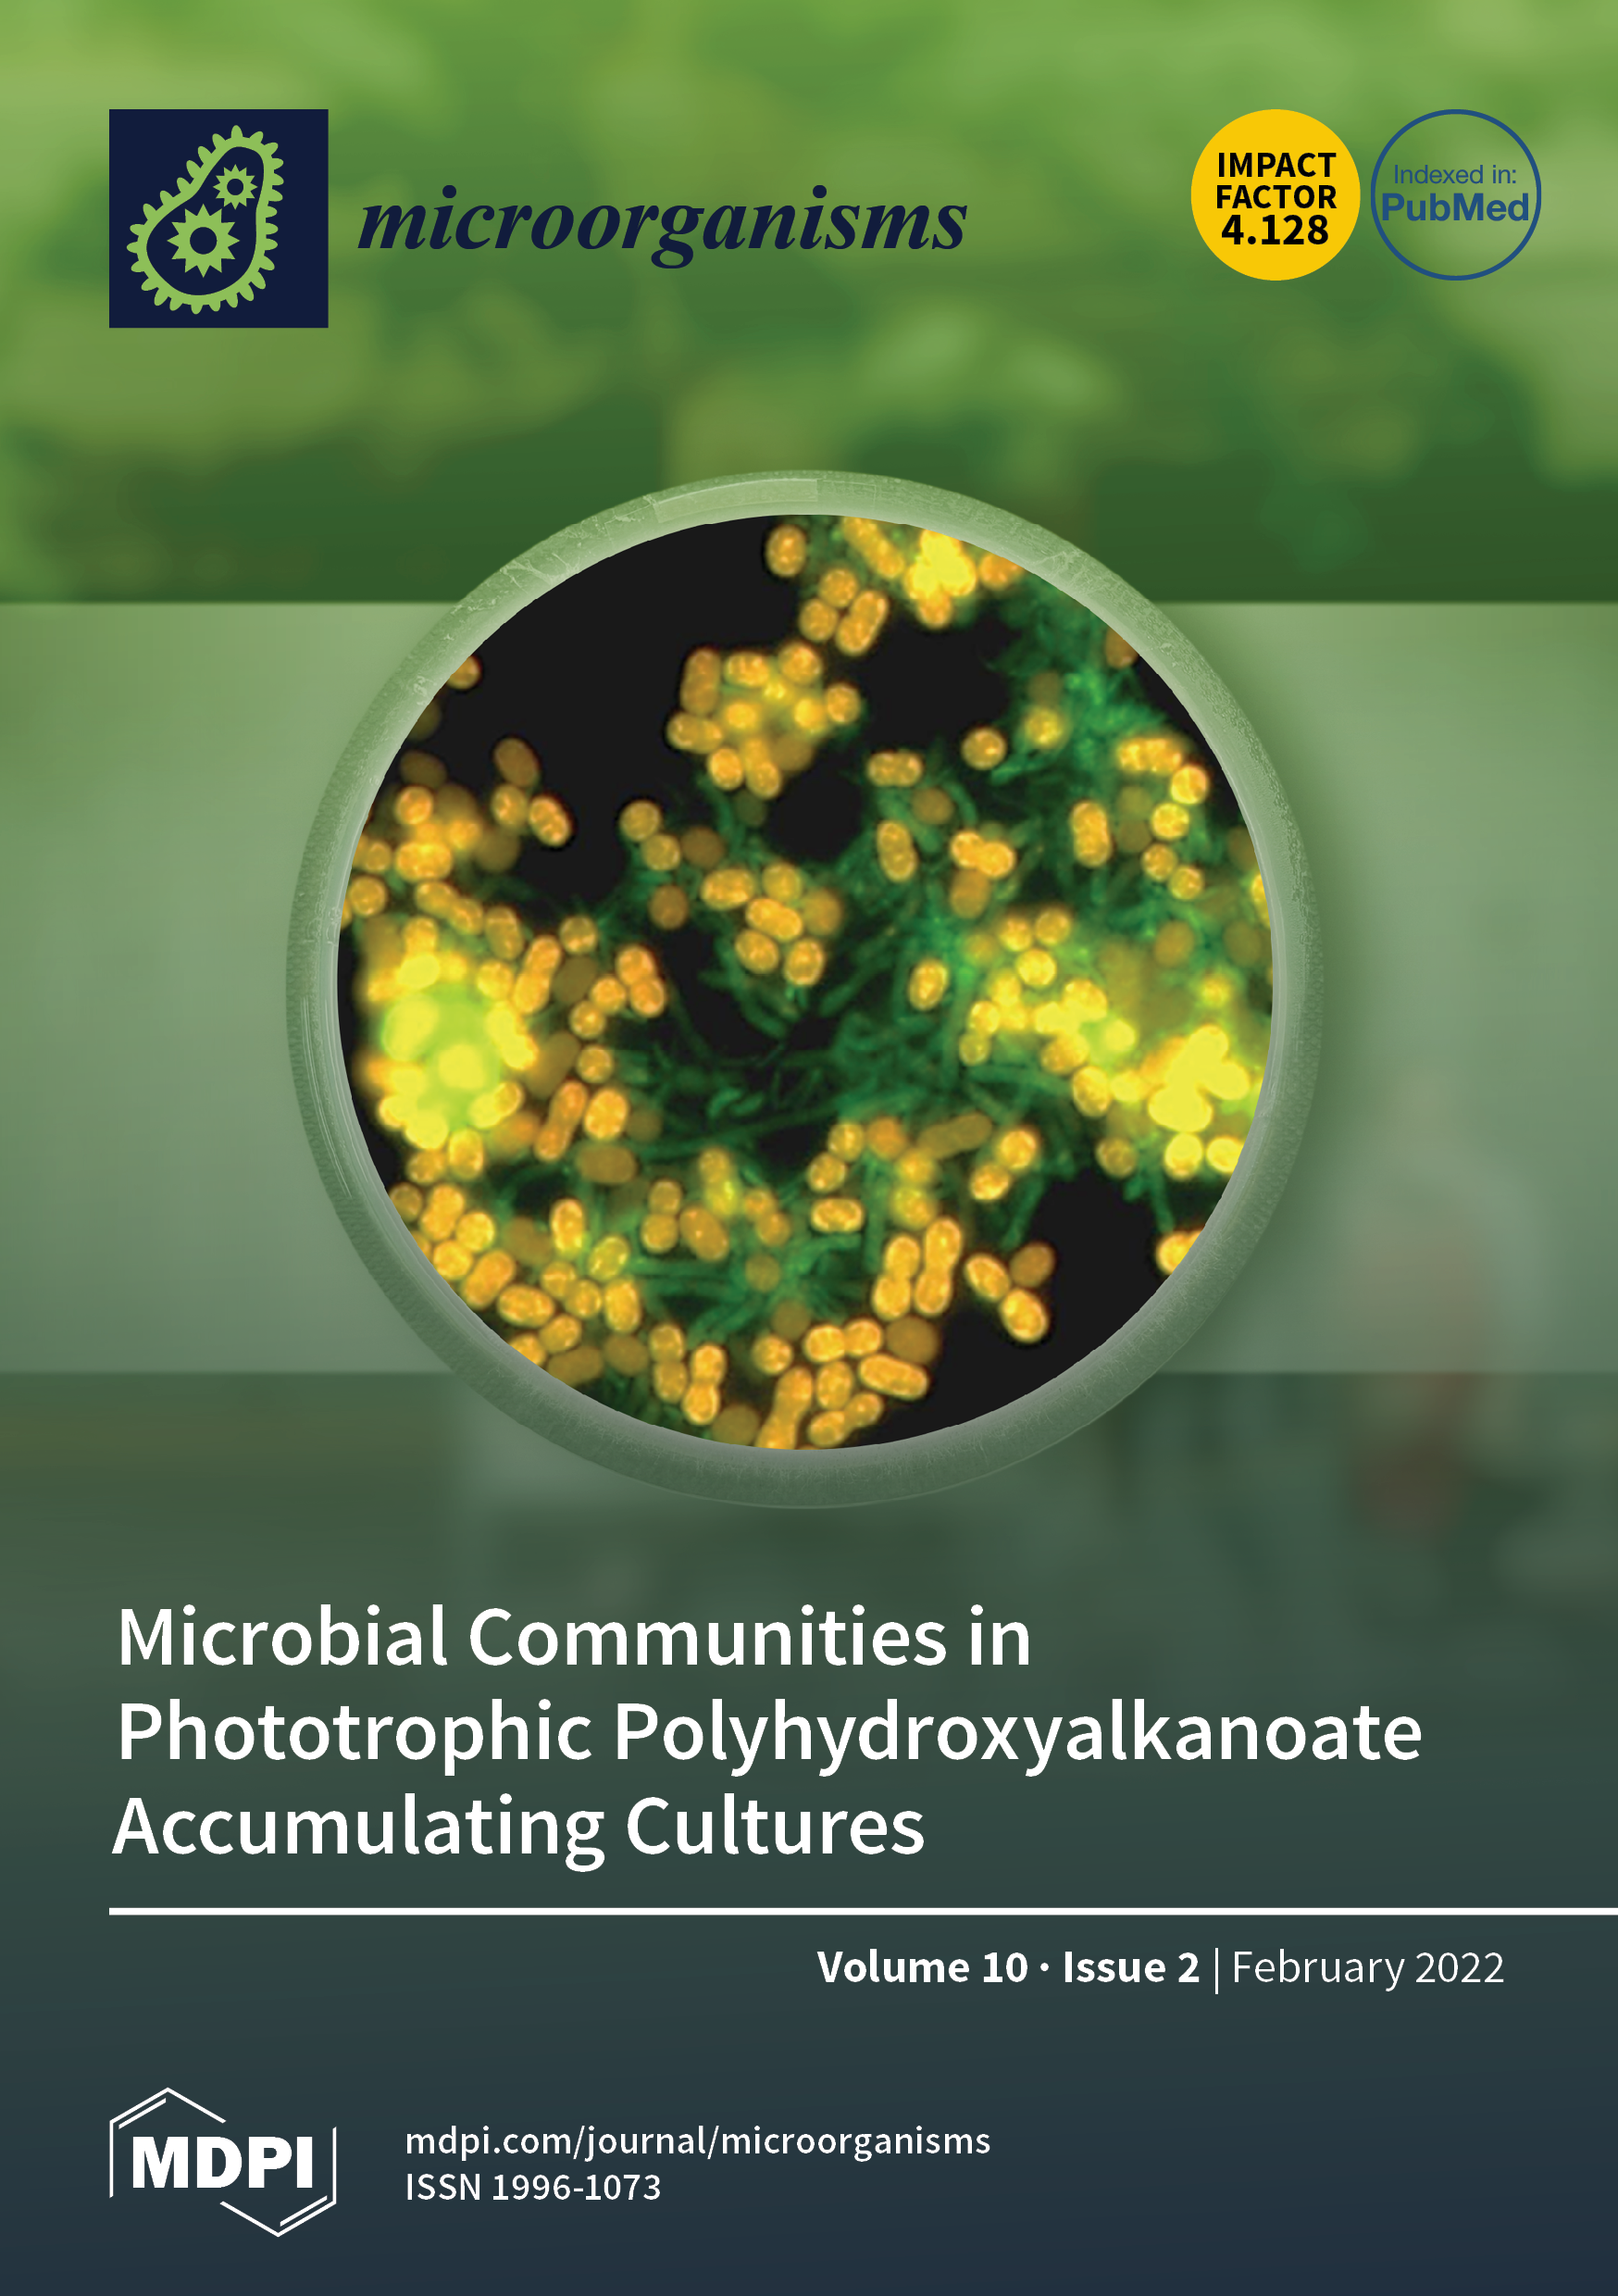 Microorganisms | February 2022 - Browse Articles